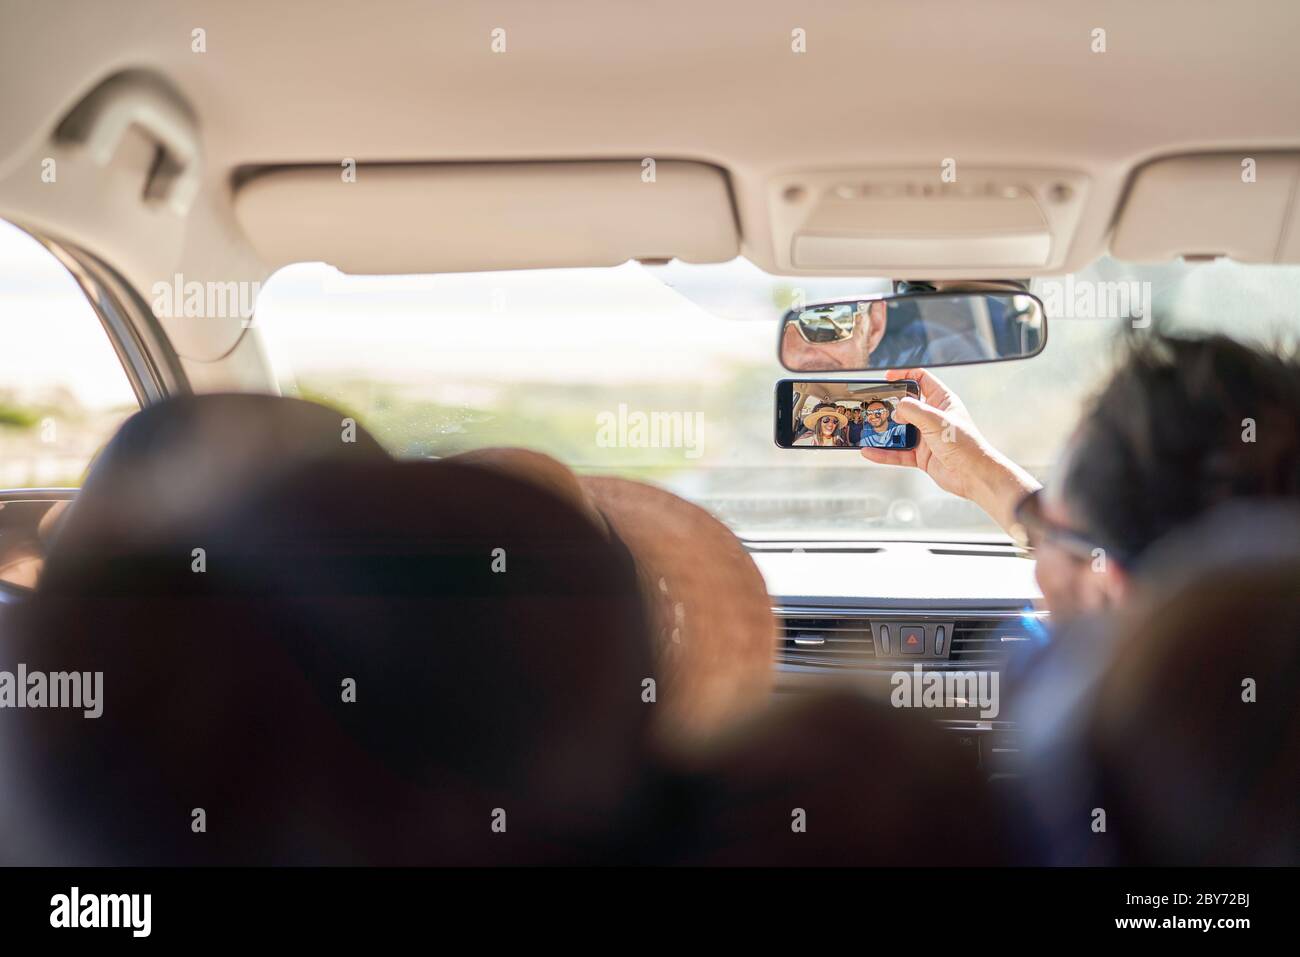 Family taking selfie with camera phone inside car Stock Photo